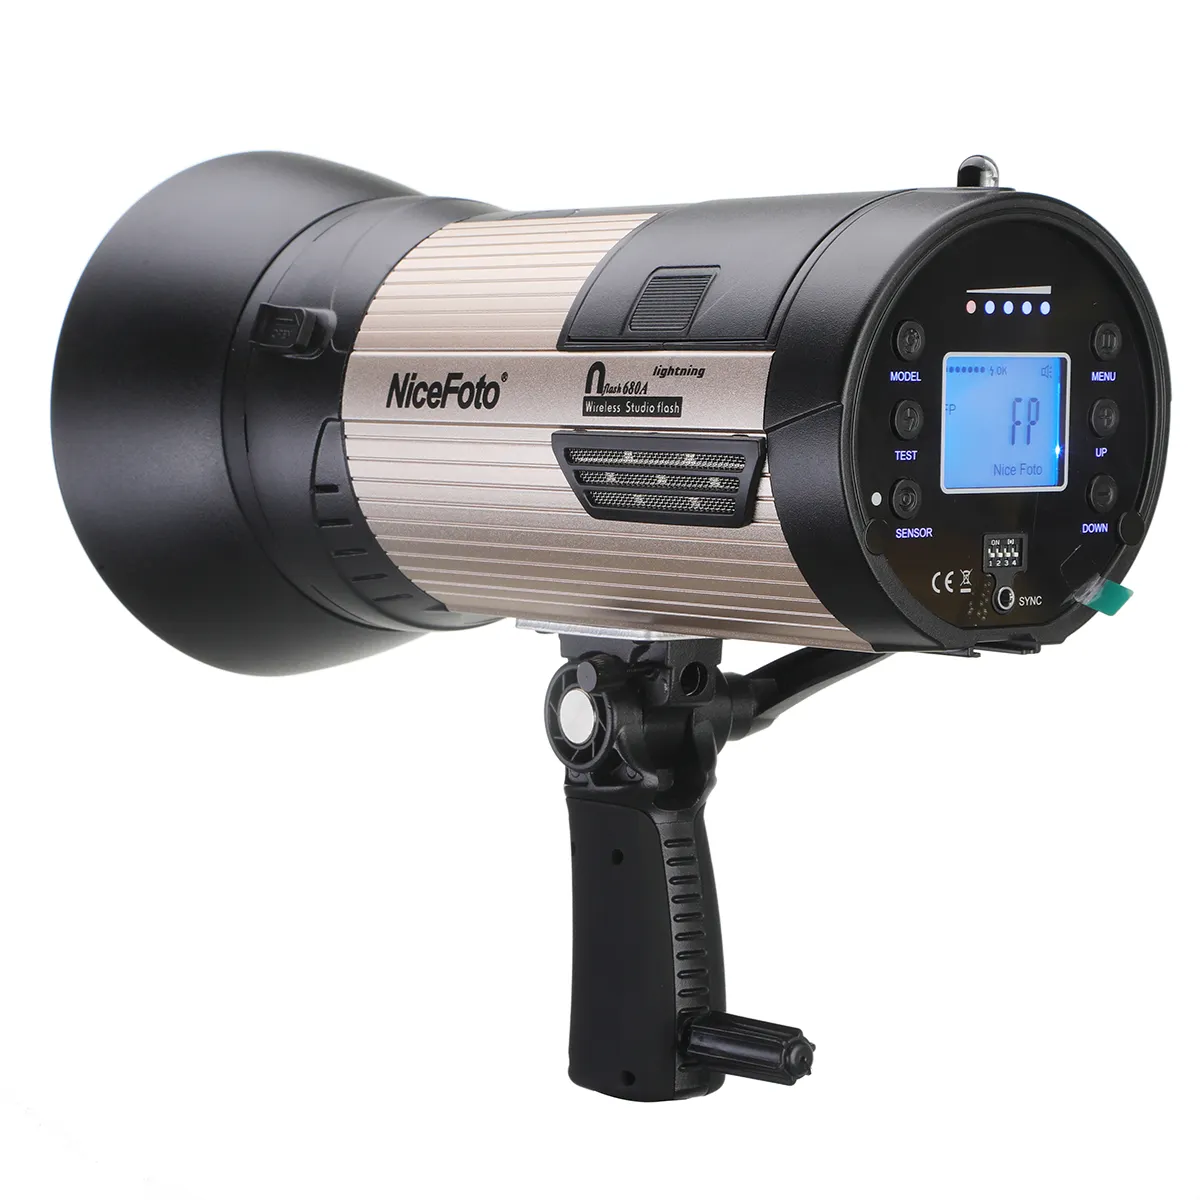 Nflash680A Nicefoto 680W Professional Photographic Studio Flash Strobe Light Battery Powered powered